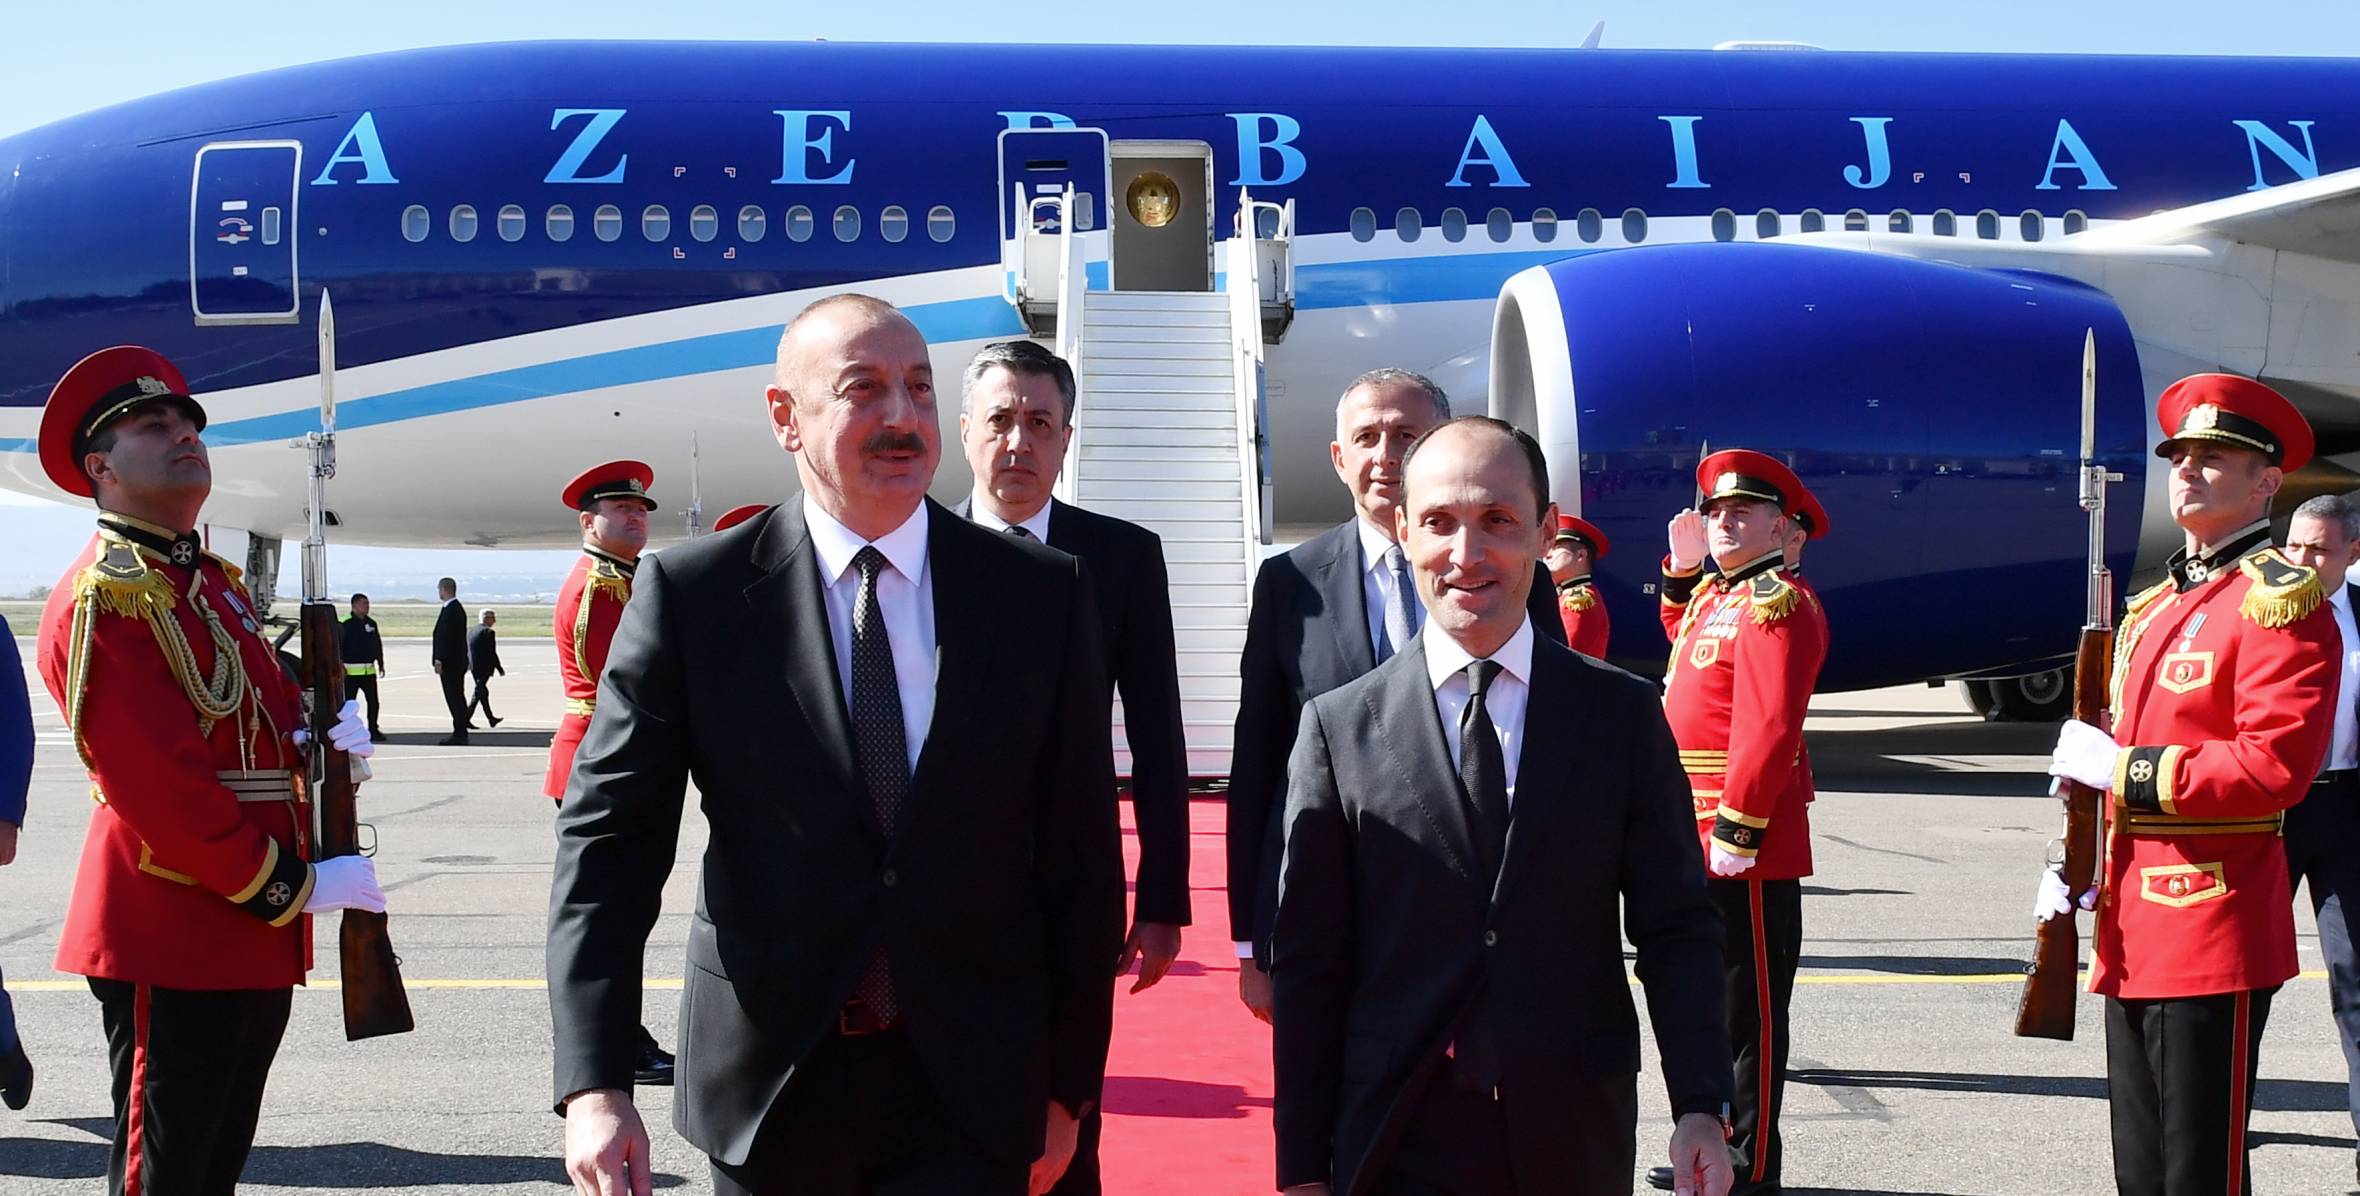 Ilham Aliyev arrived in Georgia for working visit